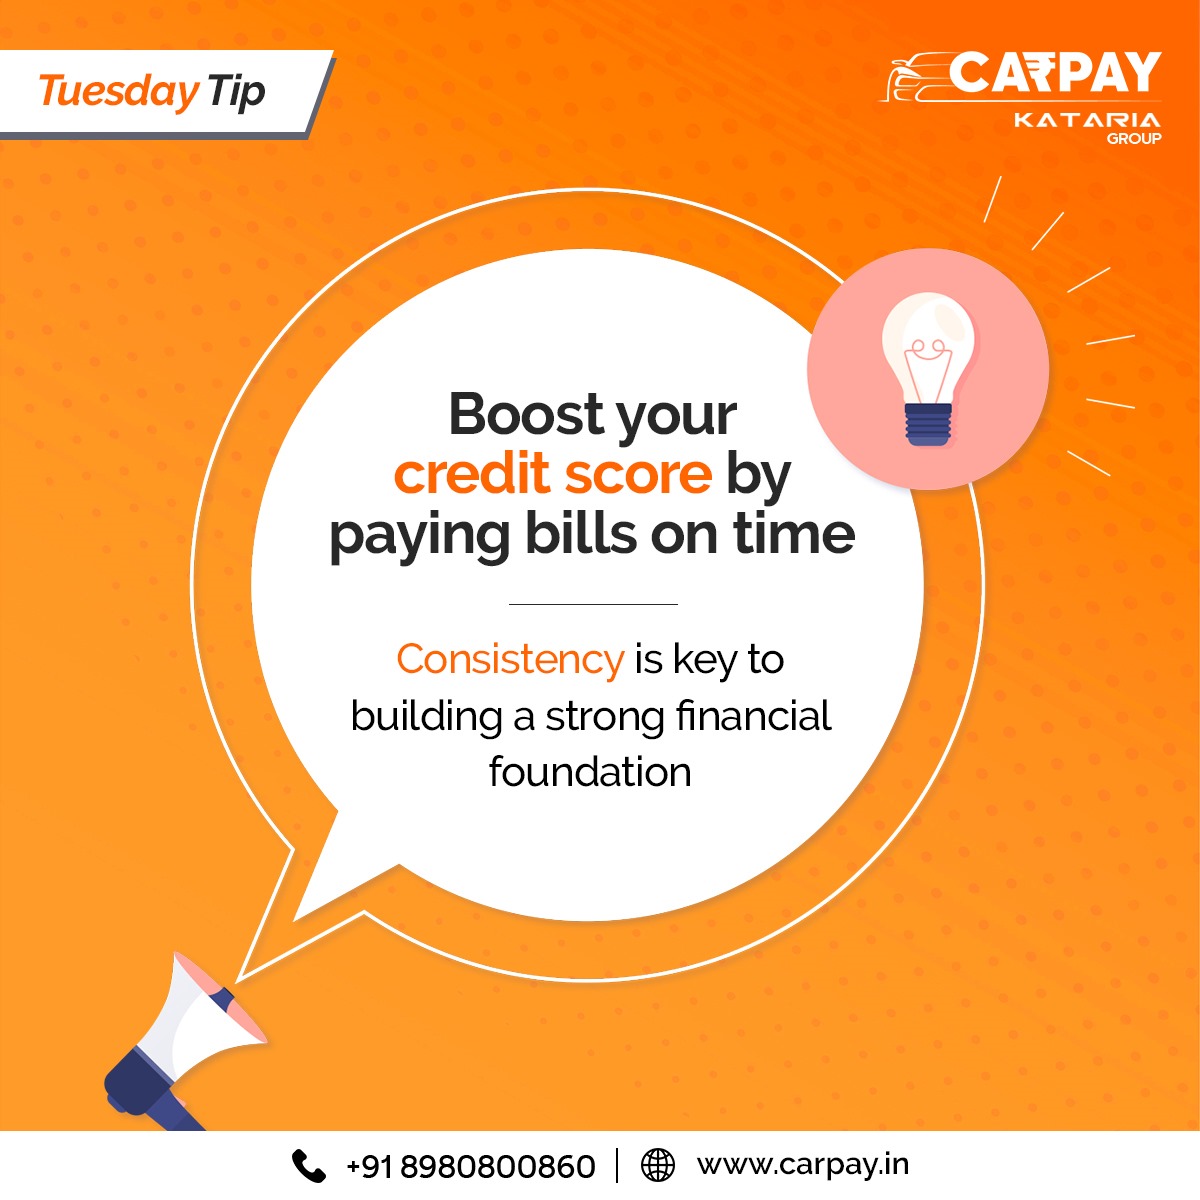 The key to a strong foundation is consistency.

To know more visit carpay.in

#KatariaCarPay #Carpay #NewCar #LoanOnUsedCar #LoanAgainstCar #QuickLoan #FastLoan #PersonalLoan #LowEmi #CarPayLoan #Loan #InstantLoan #InstantApproval #EasyLoans #Dreams #Loan #Finance